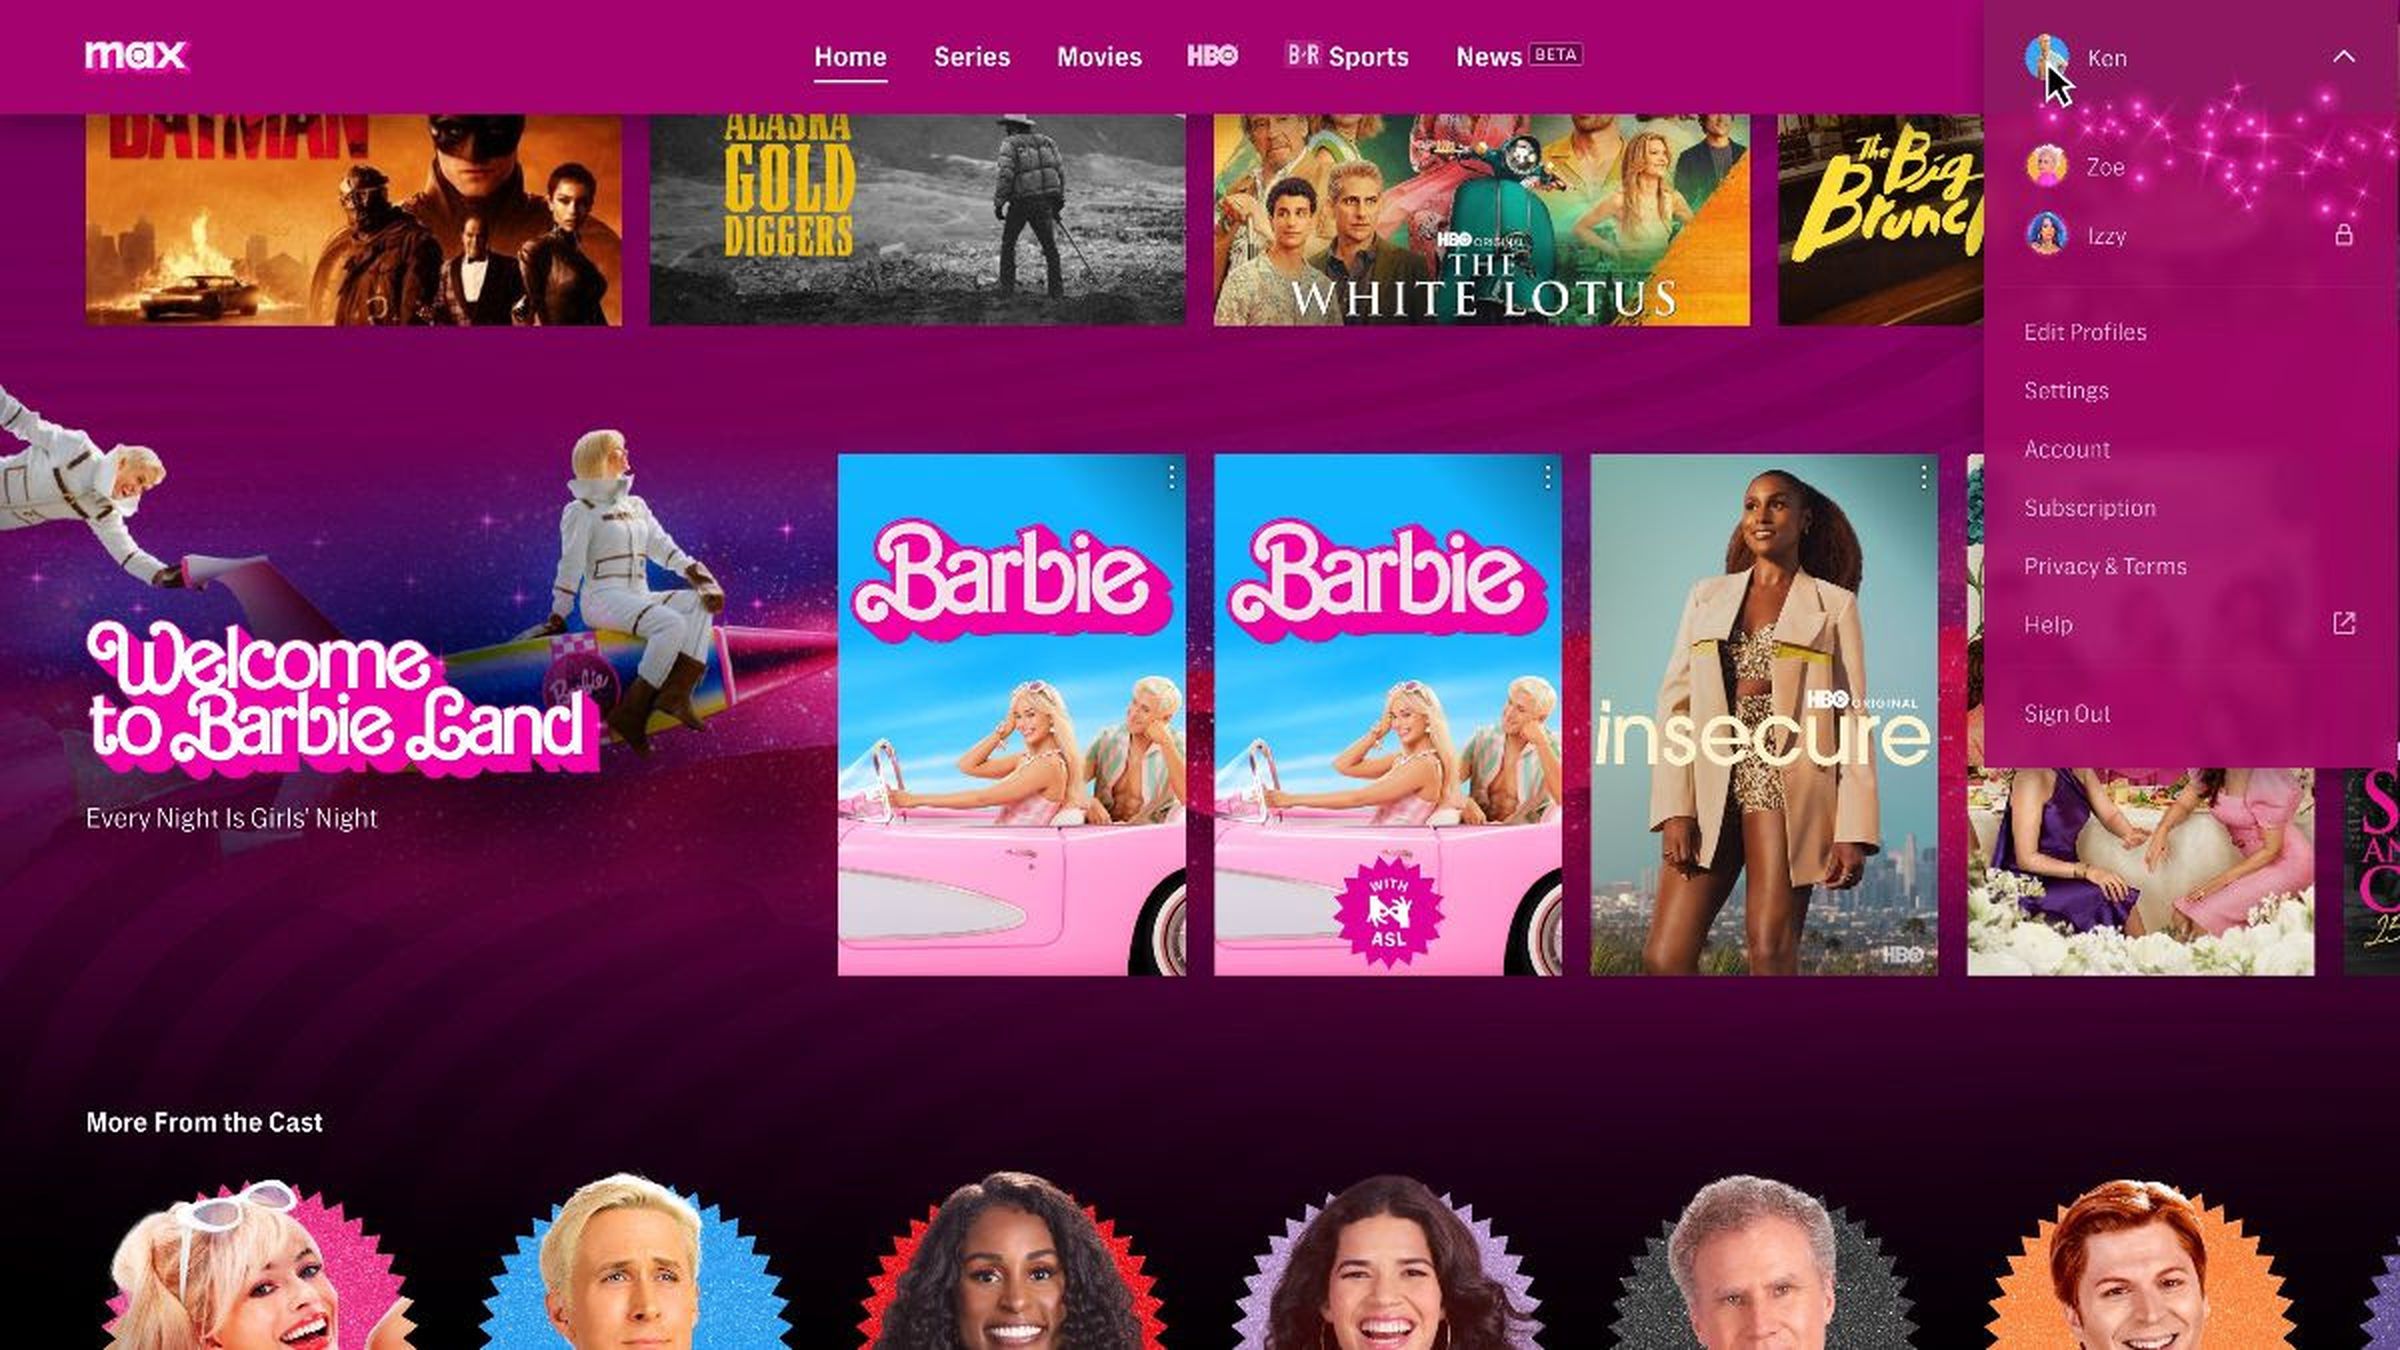 The Max homepage rendered in pink to celebrate Barbie’s premiere.